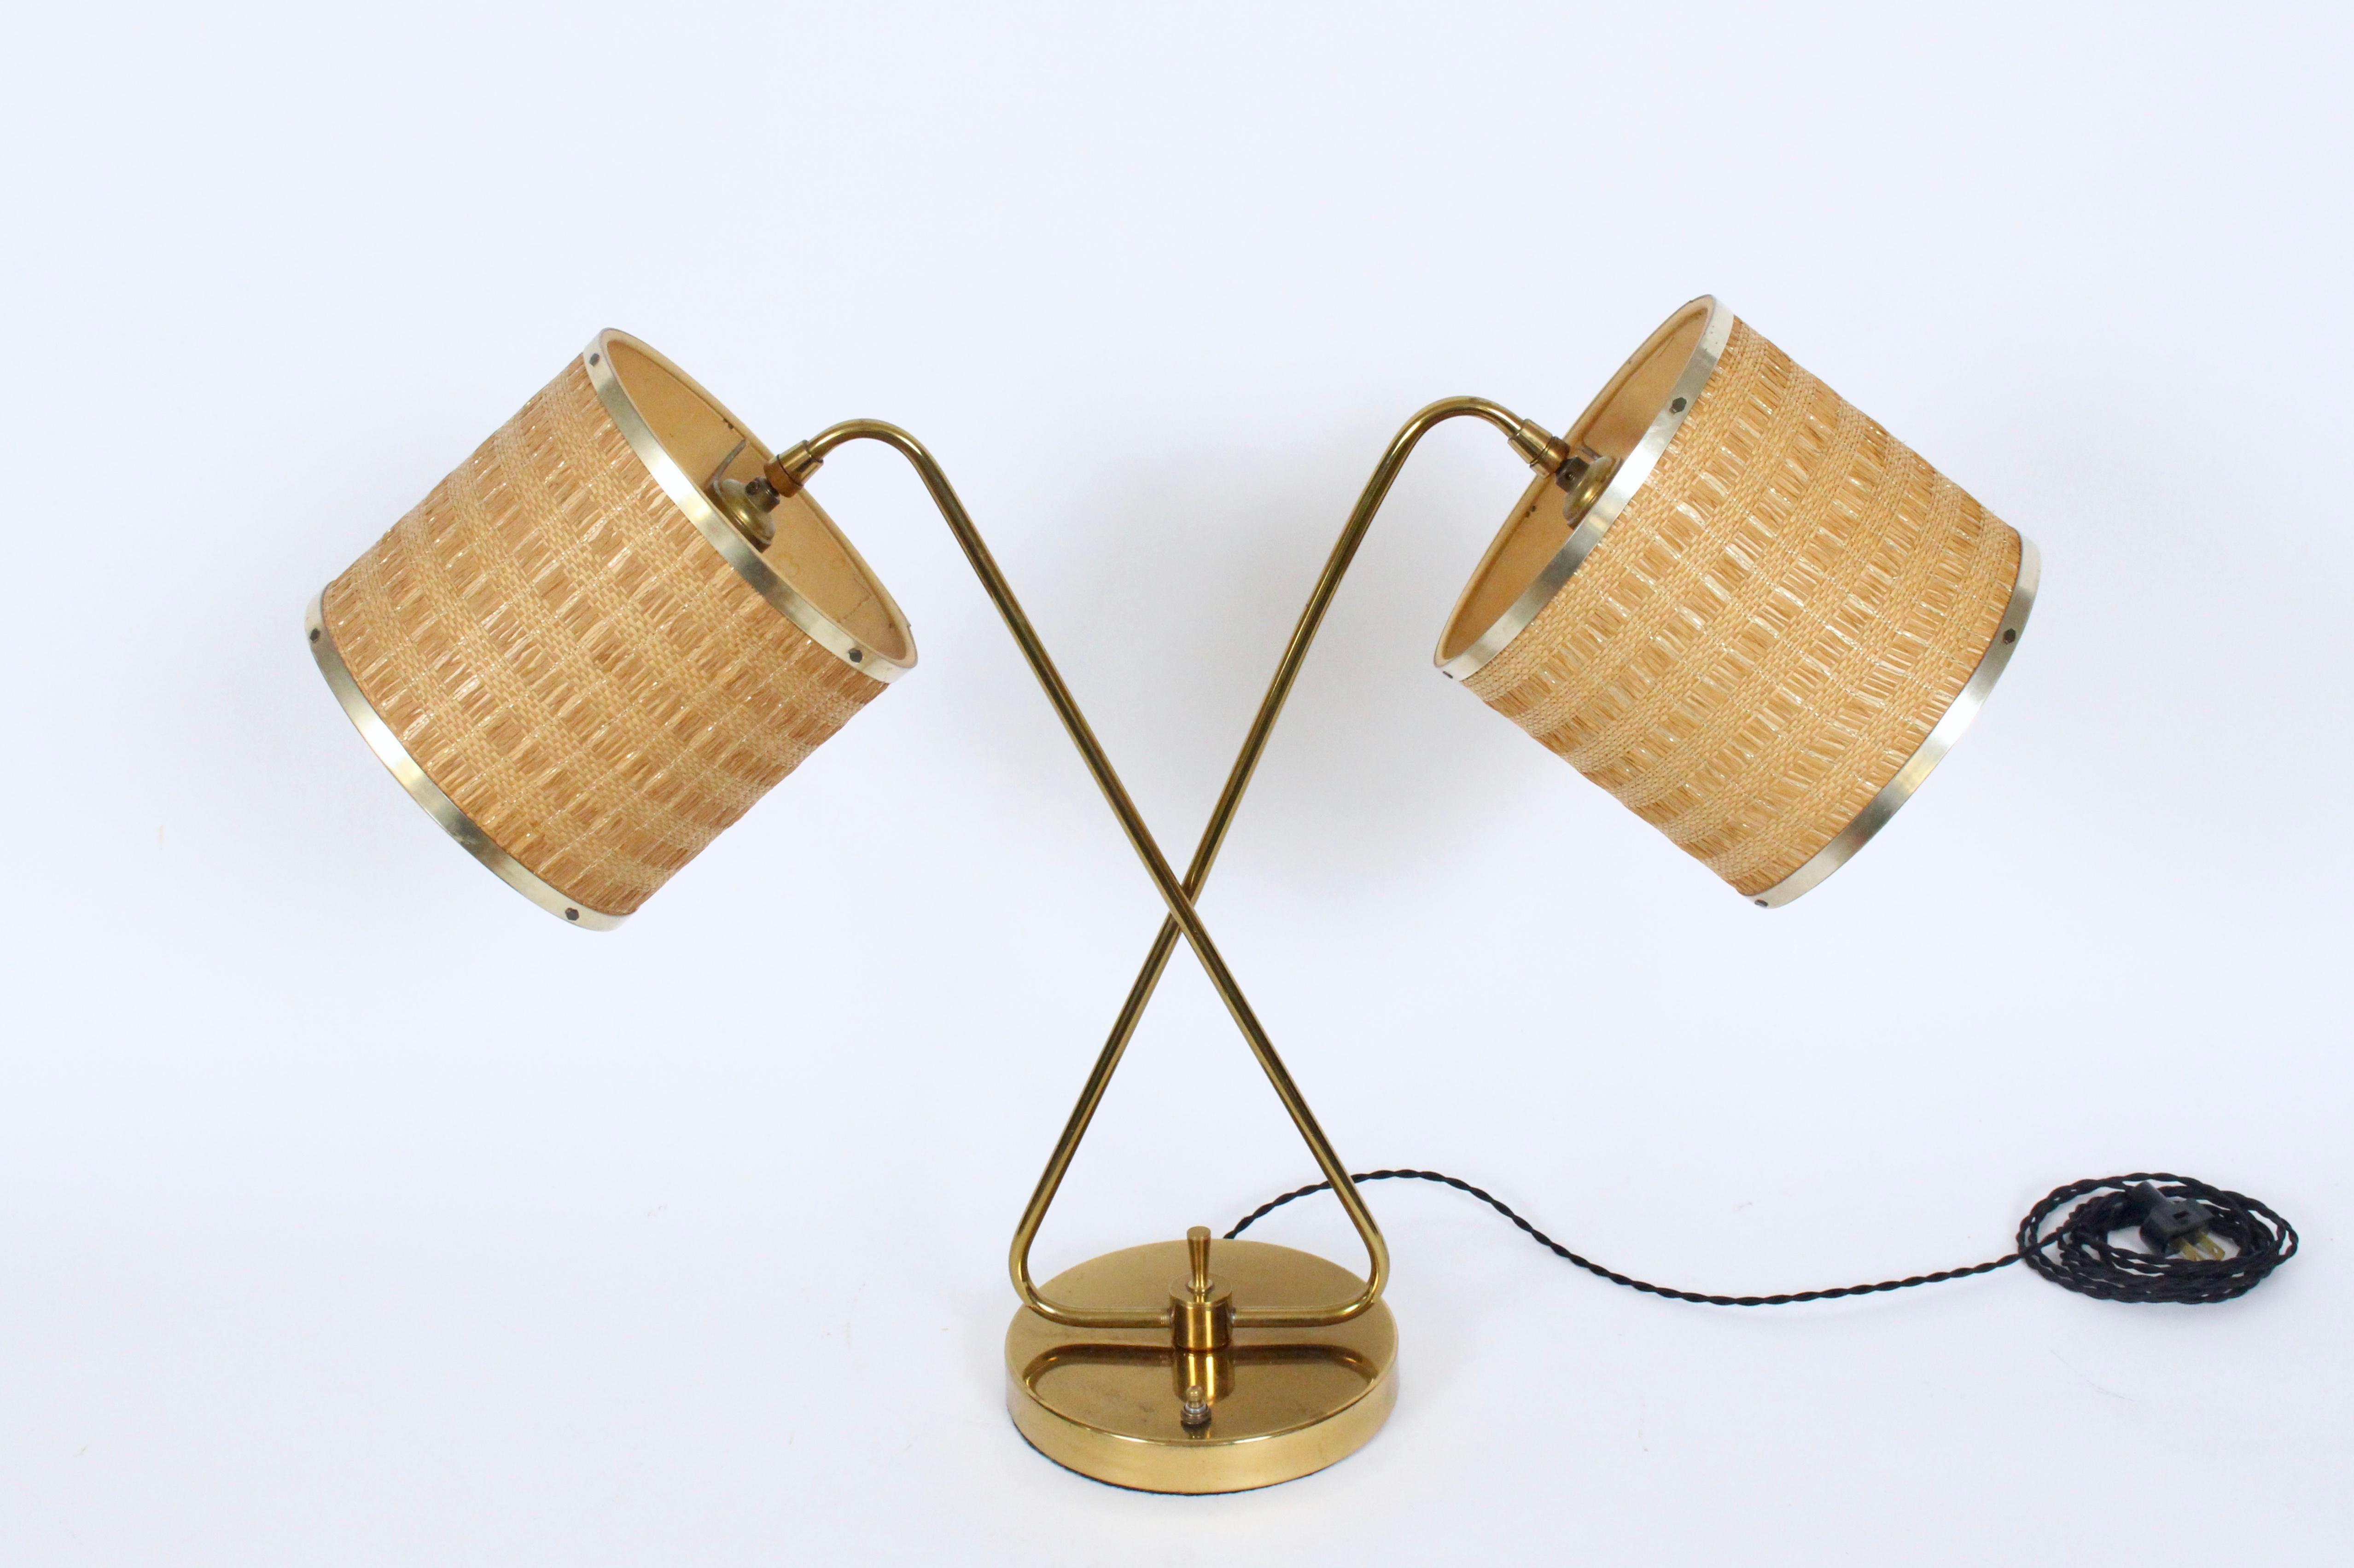 Plated Gerald Thurston Brass Crossed Sword Dual Shade Partners Desk Lamp, 1950's For Sale